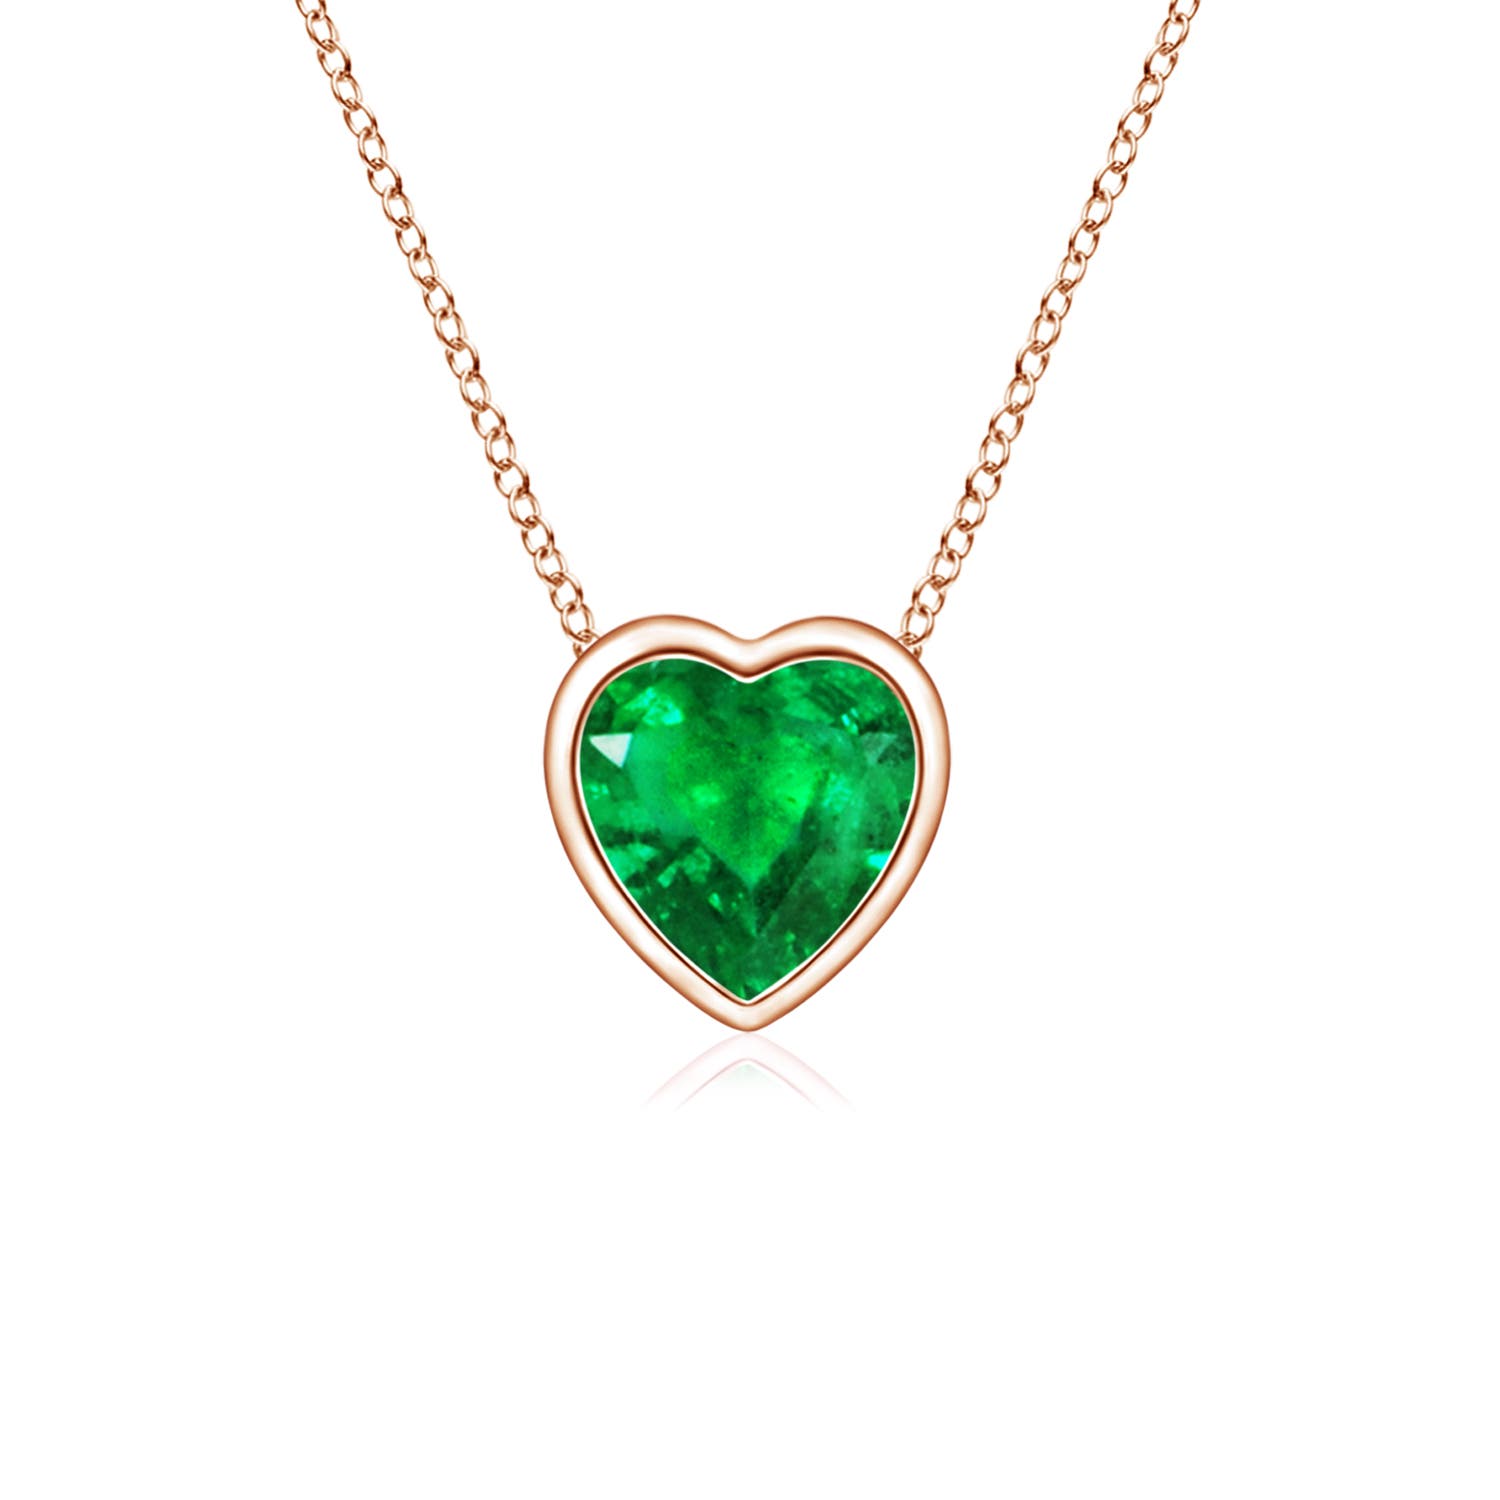 AAA - Emerald / 0.2 CT / 14 KT Rose Gold